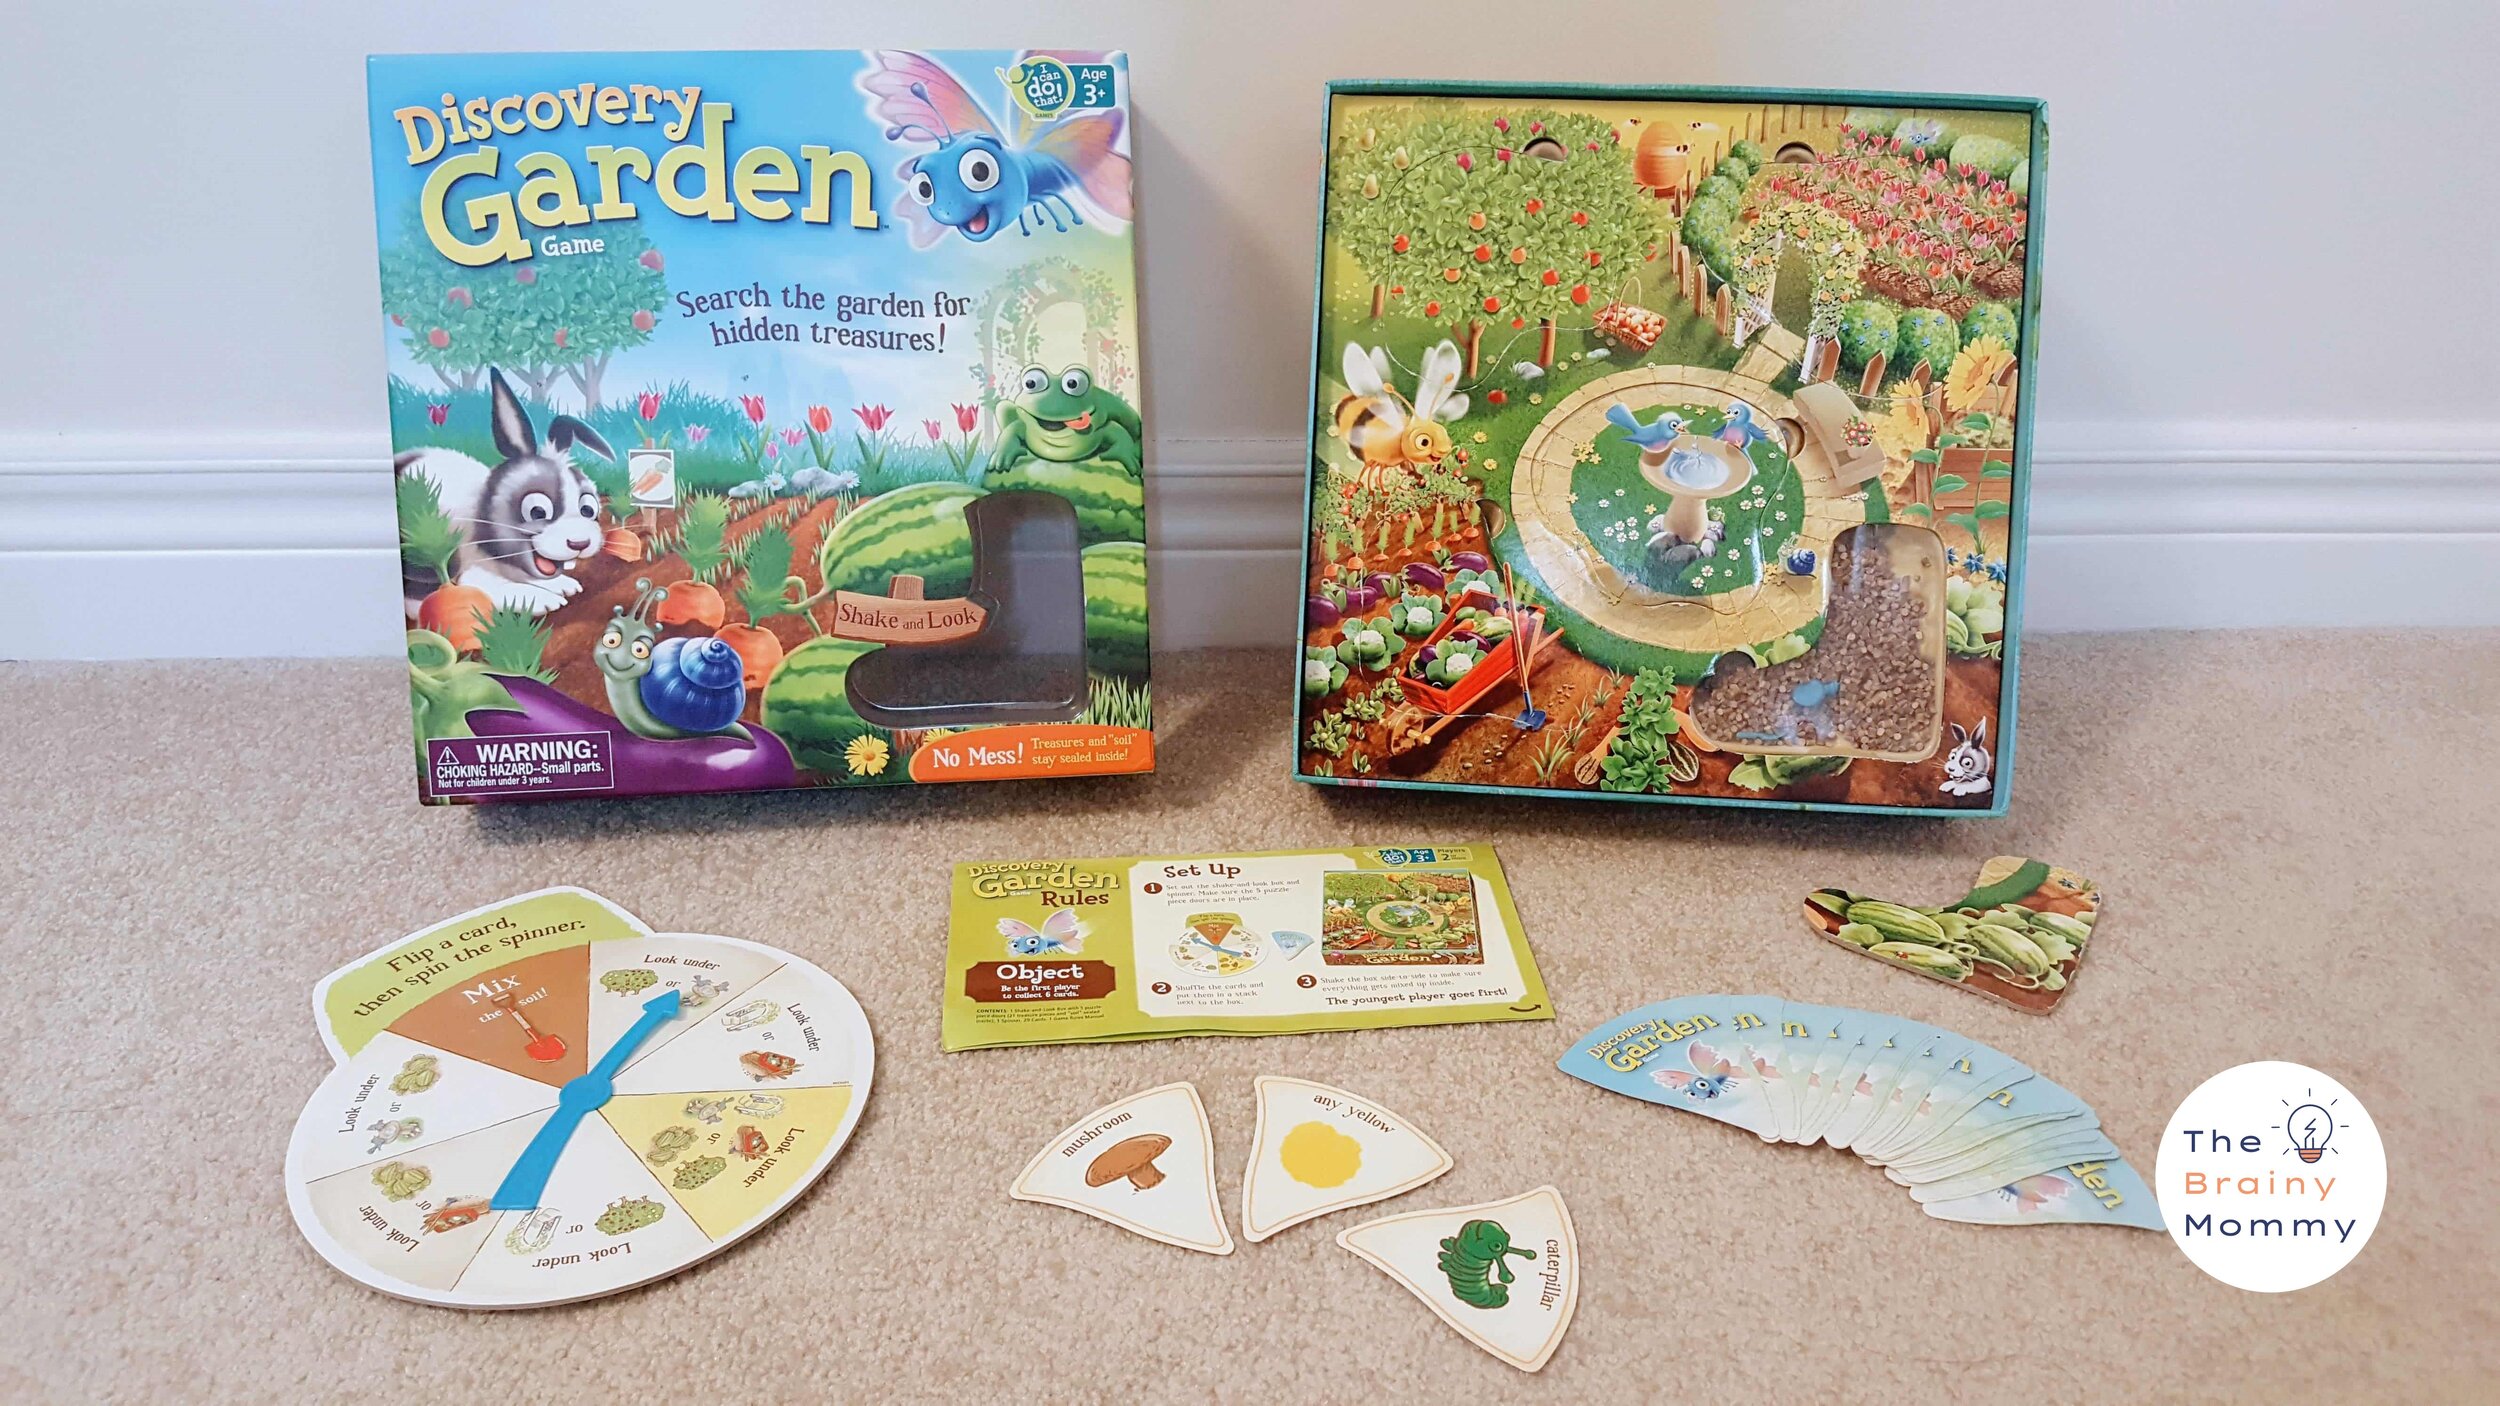 deksel Omringd zijn Discovery Garden” Game Review — The Brainy Mommy - activity ideas,  educational resources, reviews